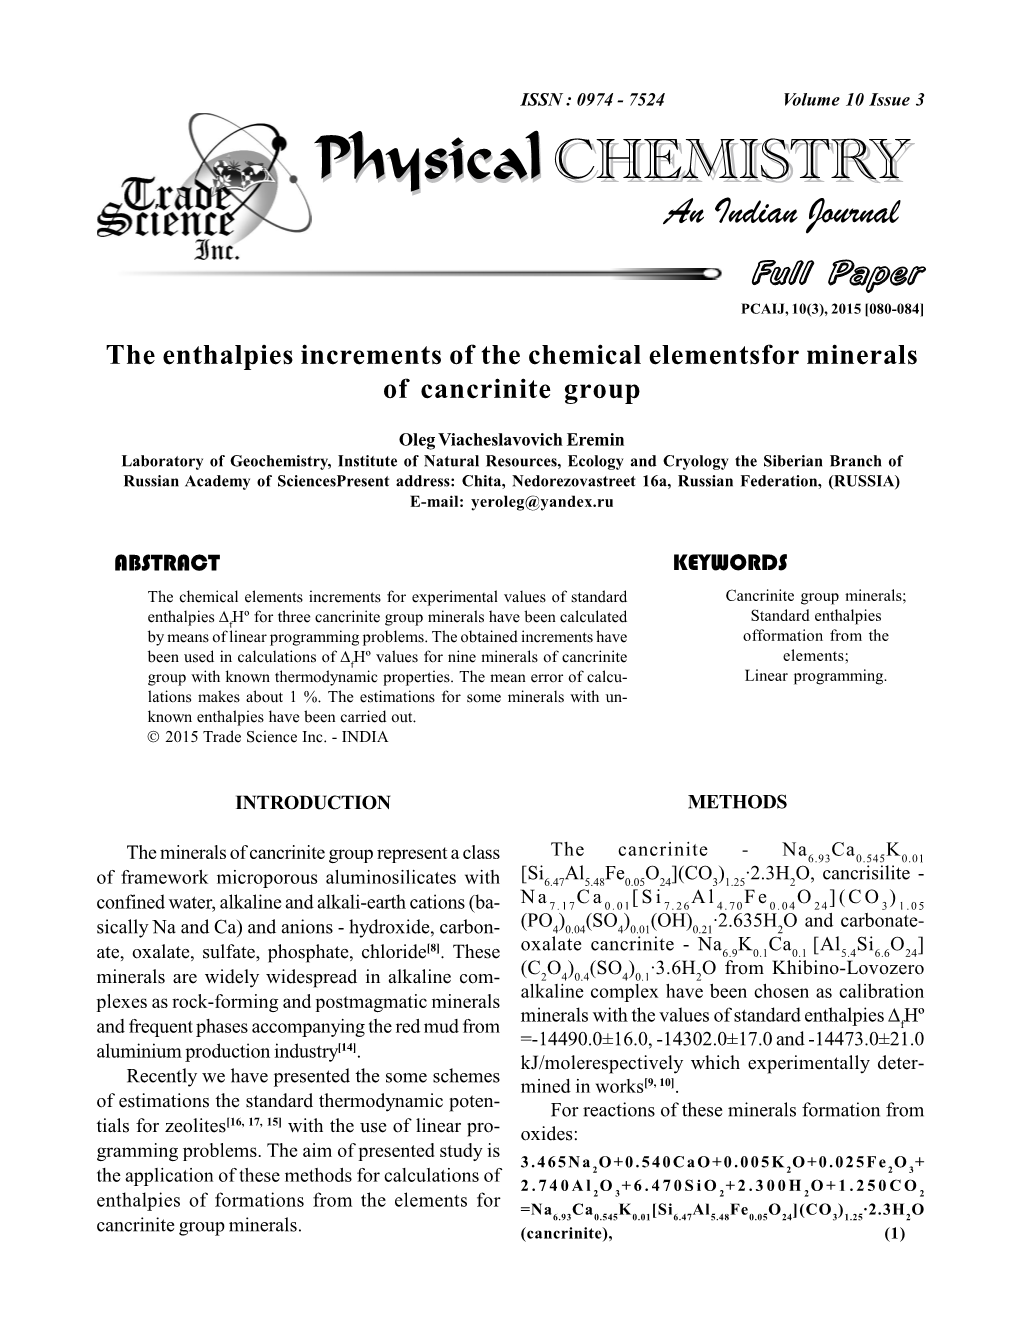 The Enthalpies Increments of the Chemical Elementsfor Minerals of Cancrinite Group